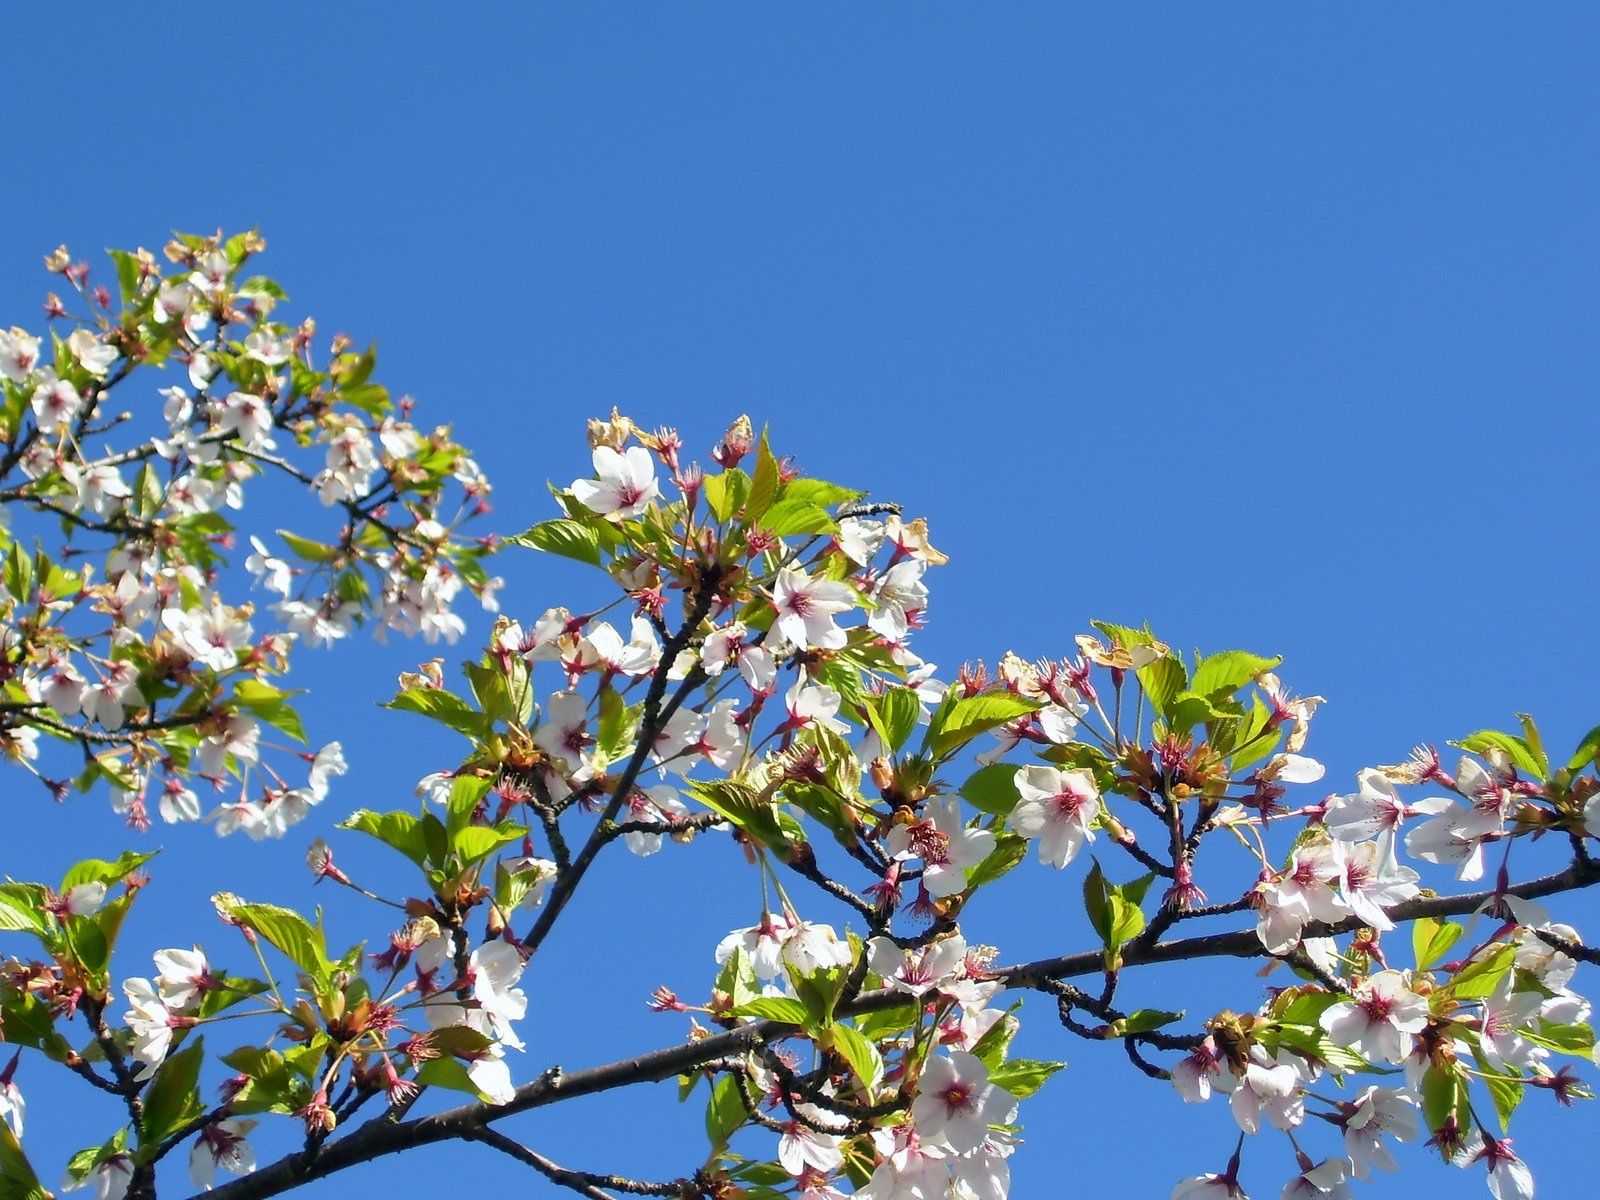 white and green leaves on a tree and blue sky in the background